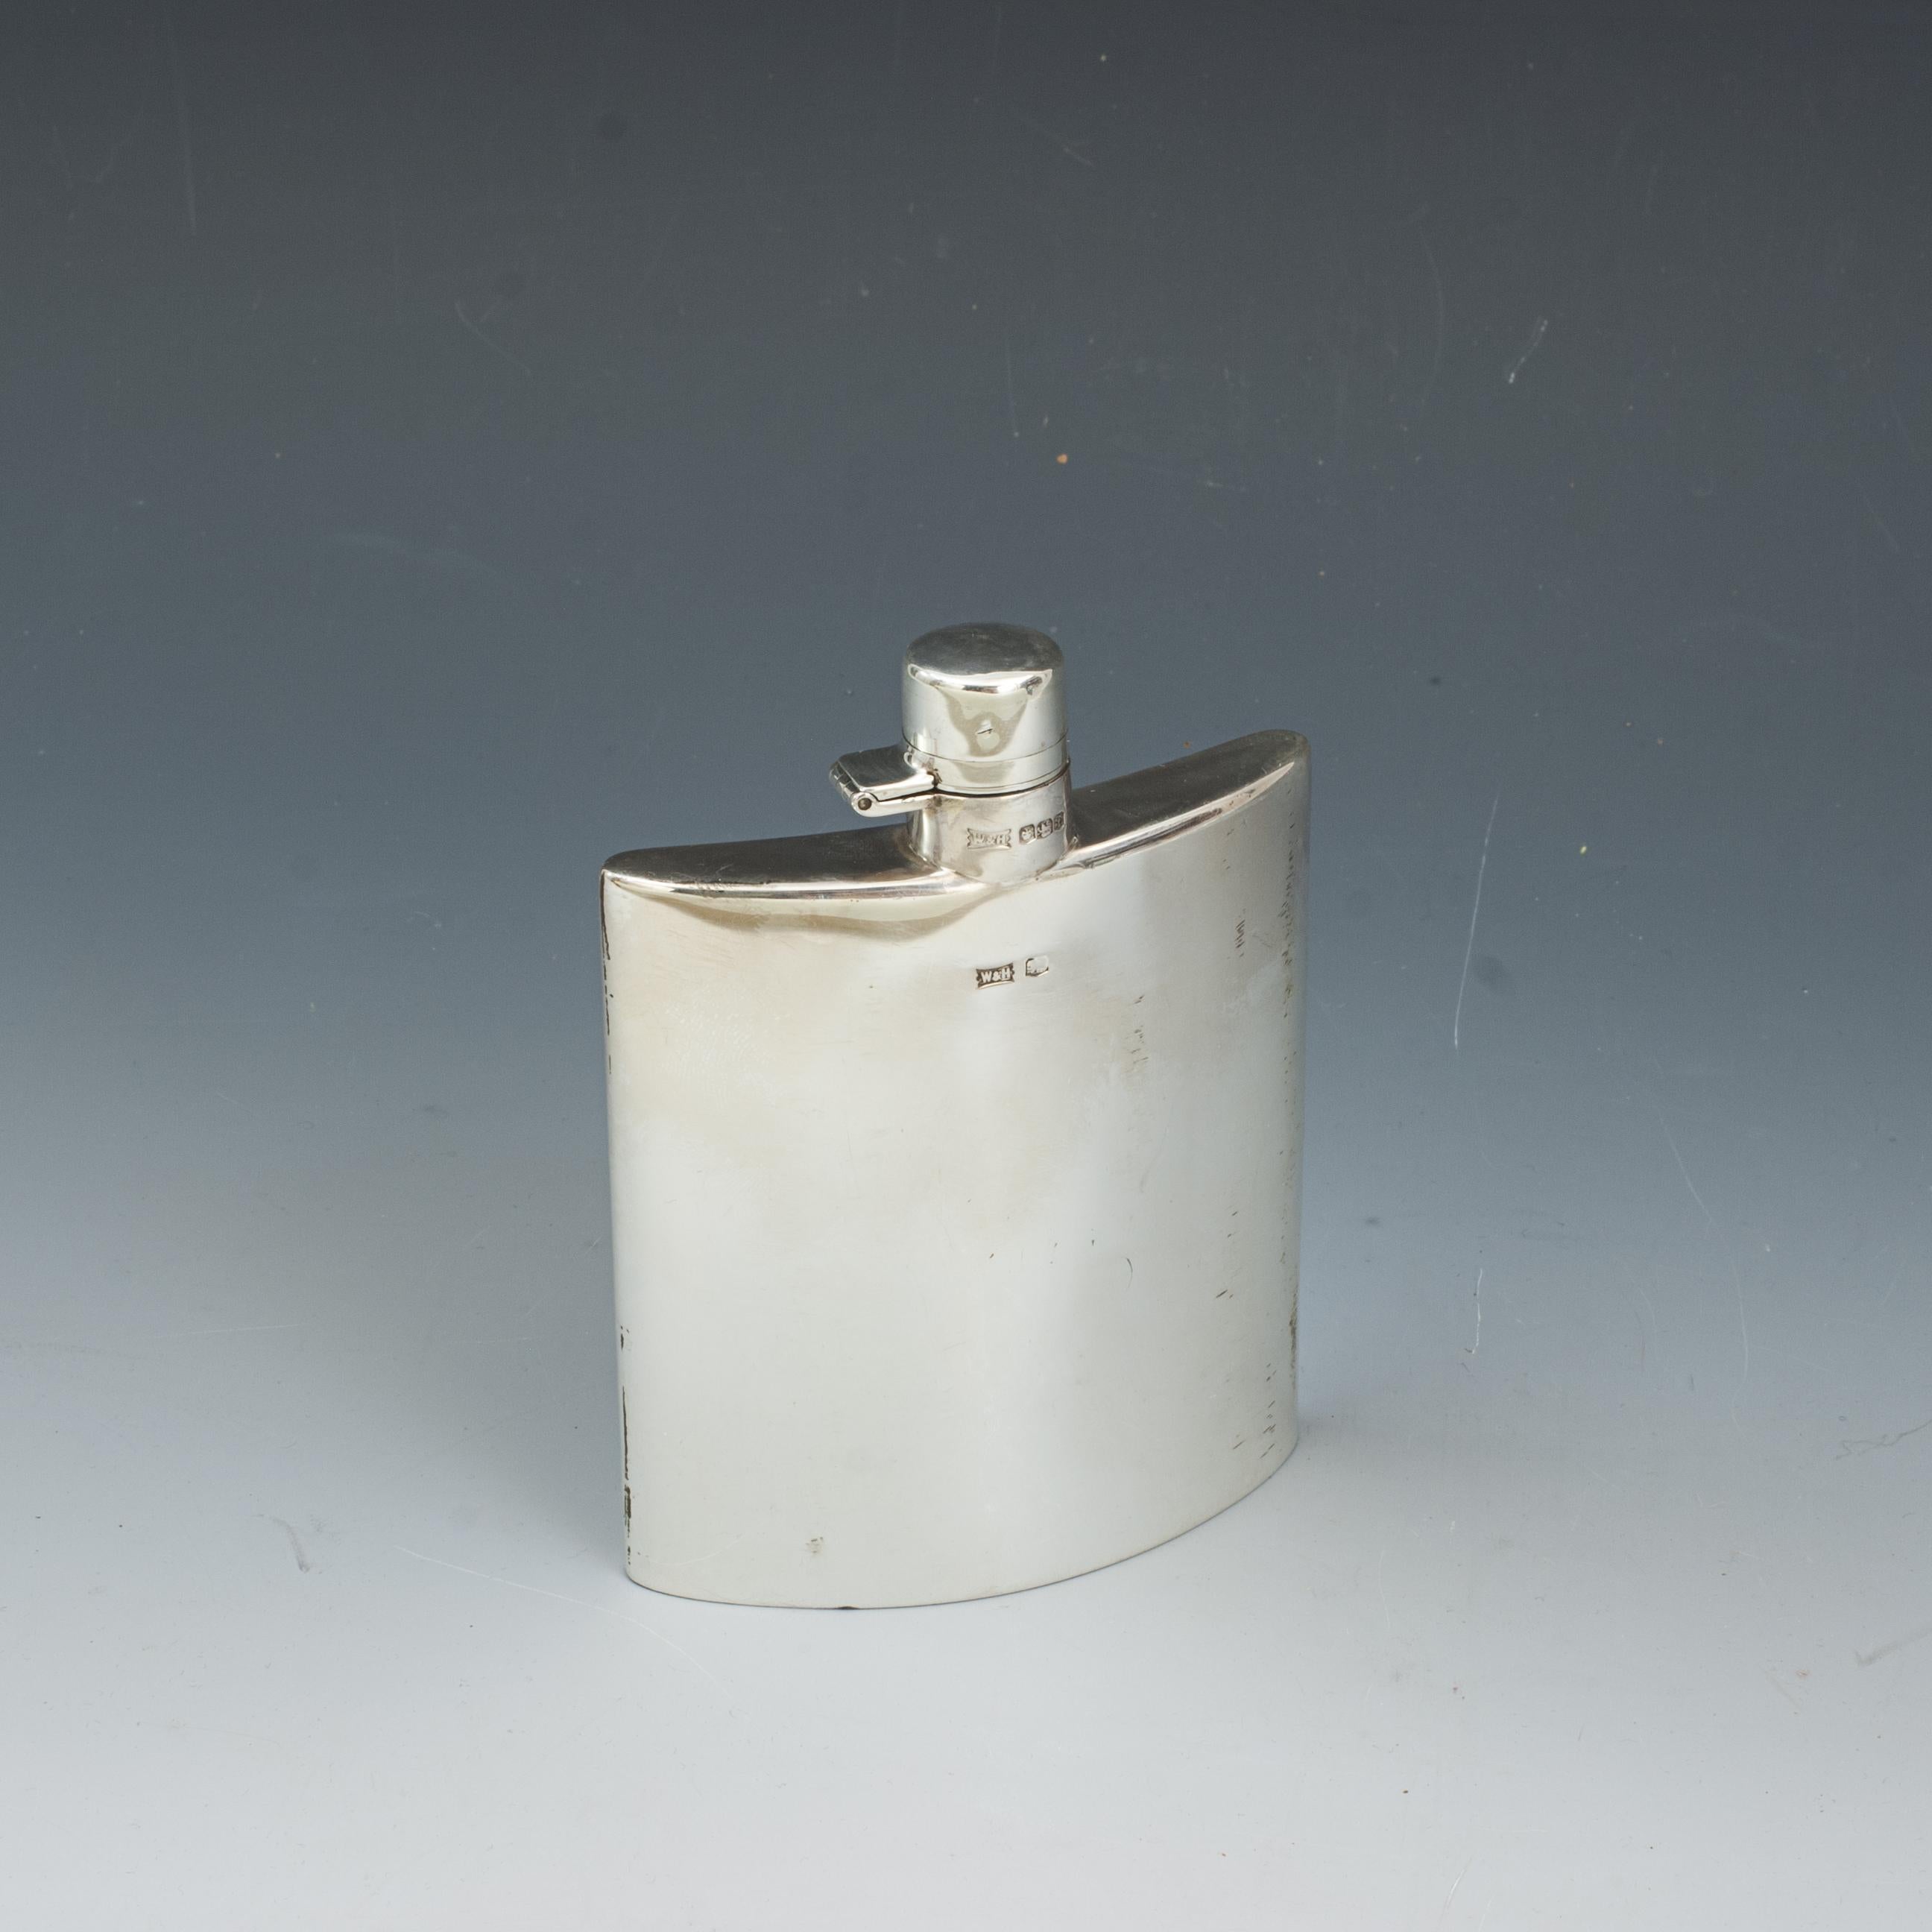 George V Silver Hip Flask.
A good curvilinear hip flask with hinged bayonet top. A beautiful gentleman's silver hip flask with a curved profile, hallmarked Sheffield, 1923, with makers mark 'W & H', Walker & Hall. Stamped on the base 'W & H pennant'